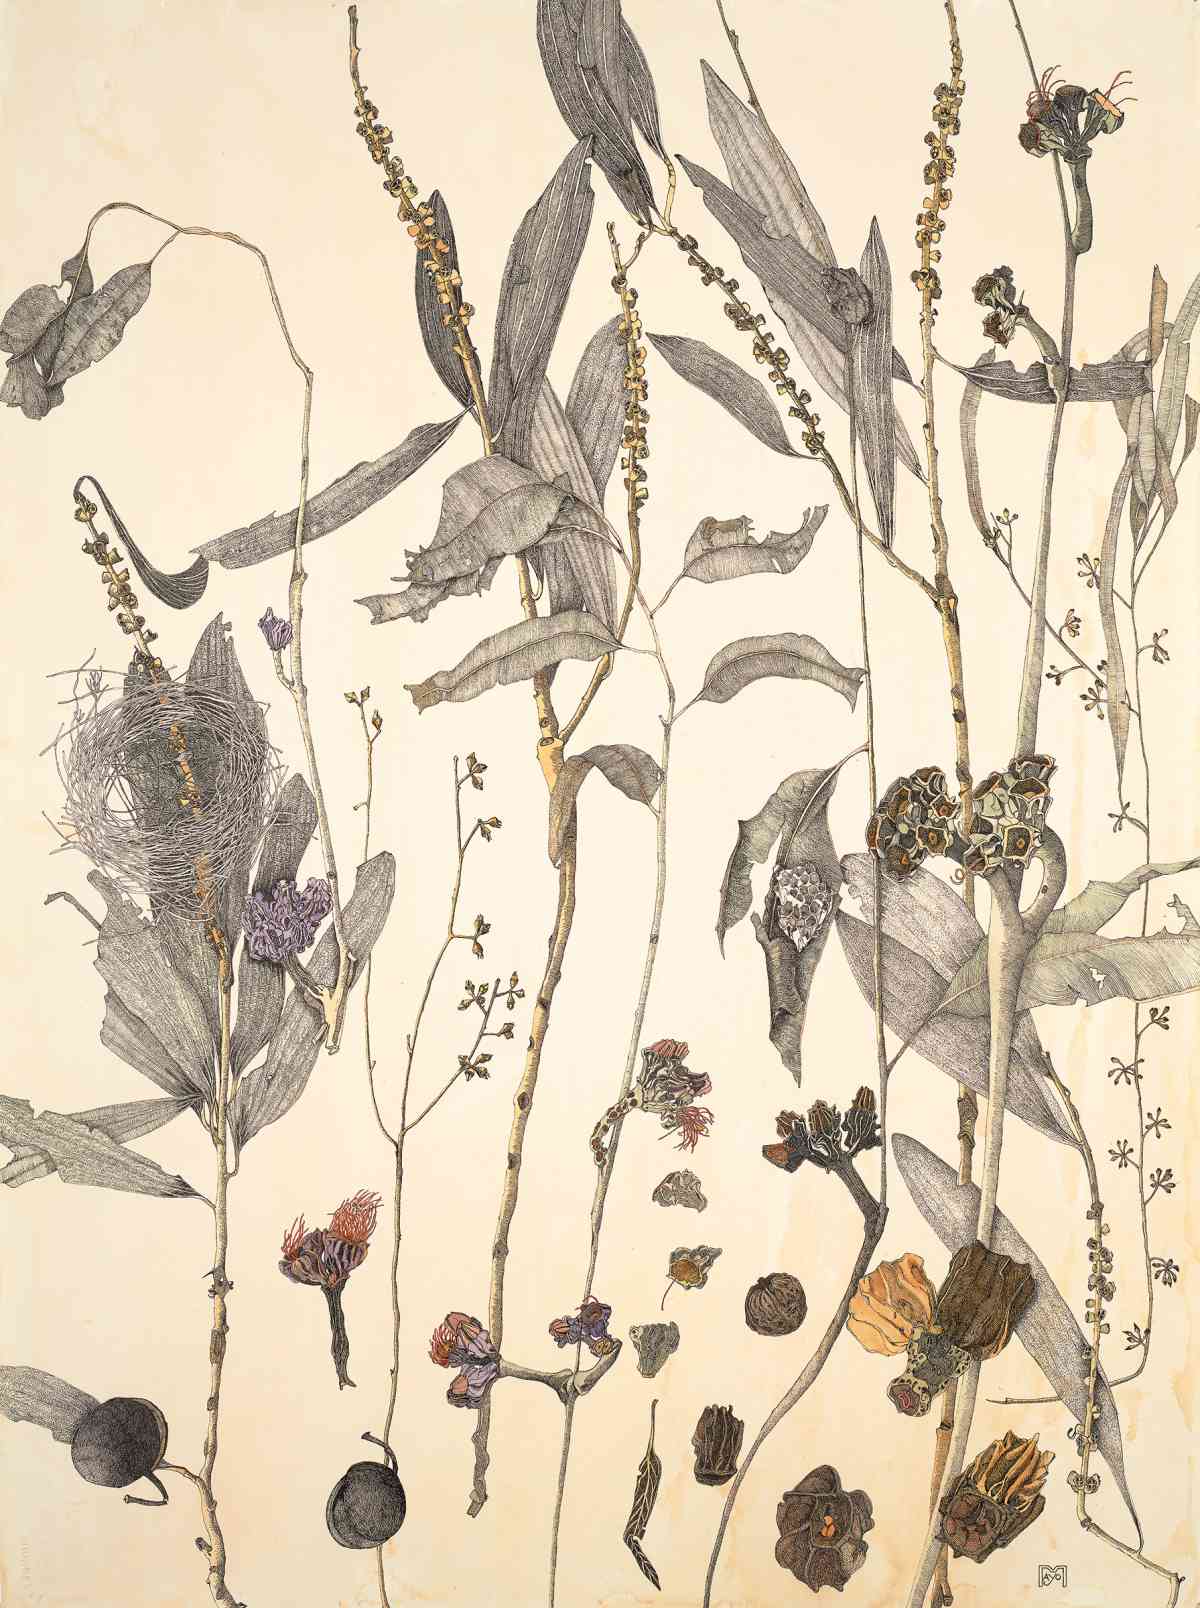 The Mandarin’s Garden and What I Found There, watercolour ink drawing, 57 X 153cm